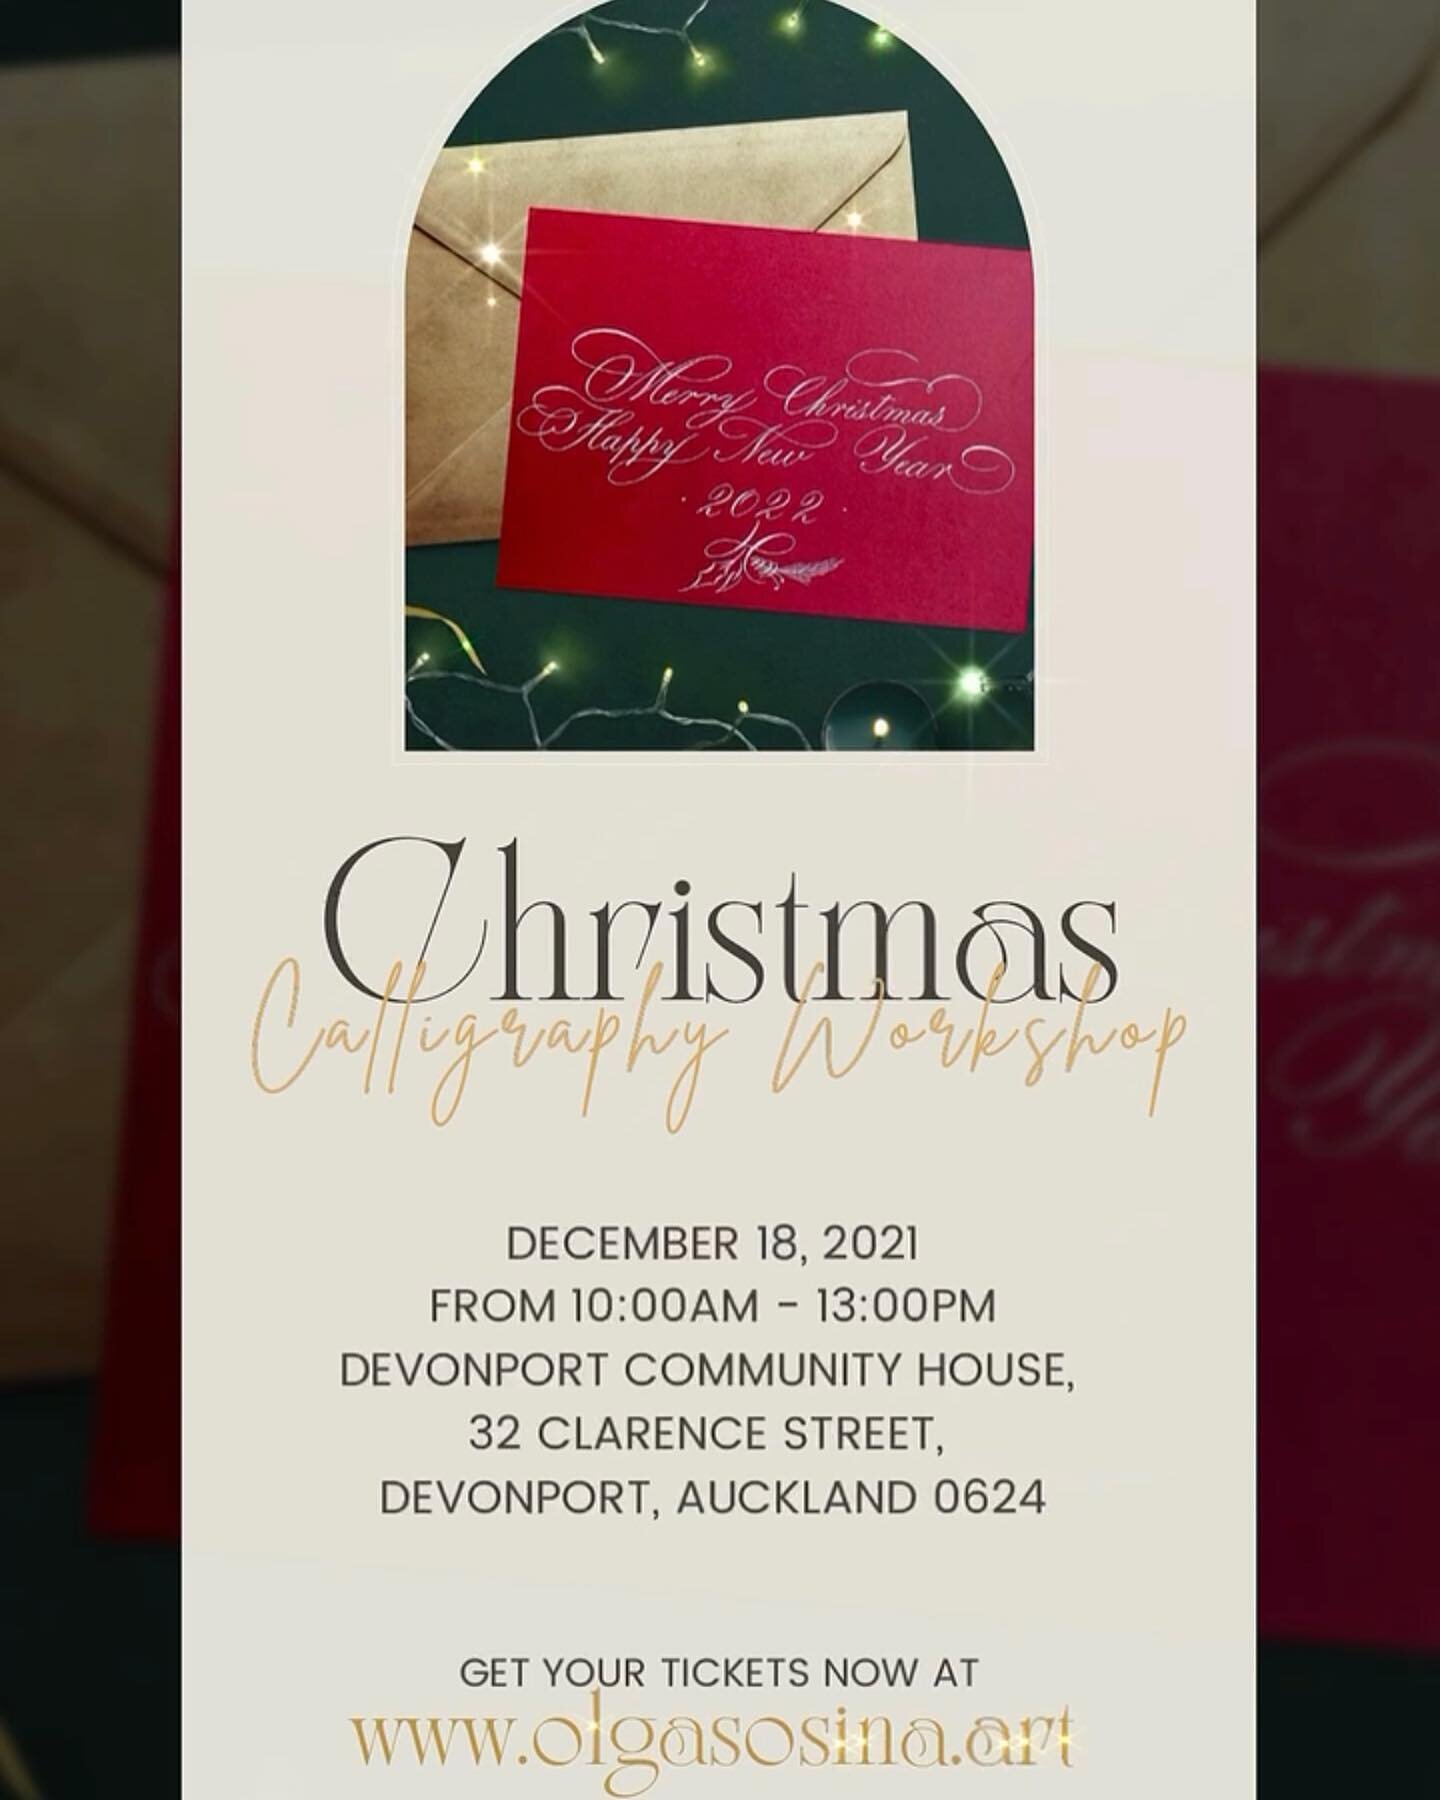 The Christmas Calligraphy workshop@is@already next Saturday, the 18th December from 10:00 to 13:00. Come for Christmas inspiration 🌟🎄You may purchase tickets in the link in bio. Please send me DM if you have any questions ☺️